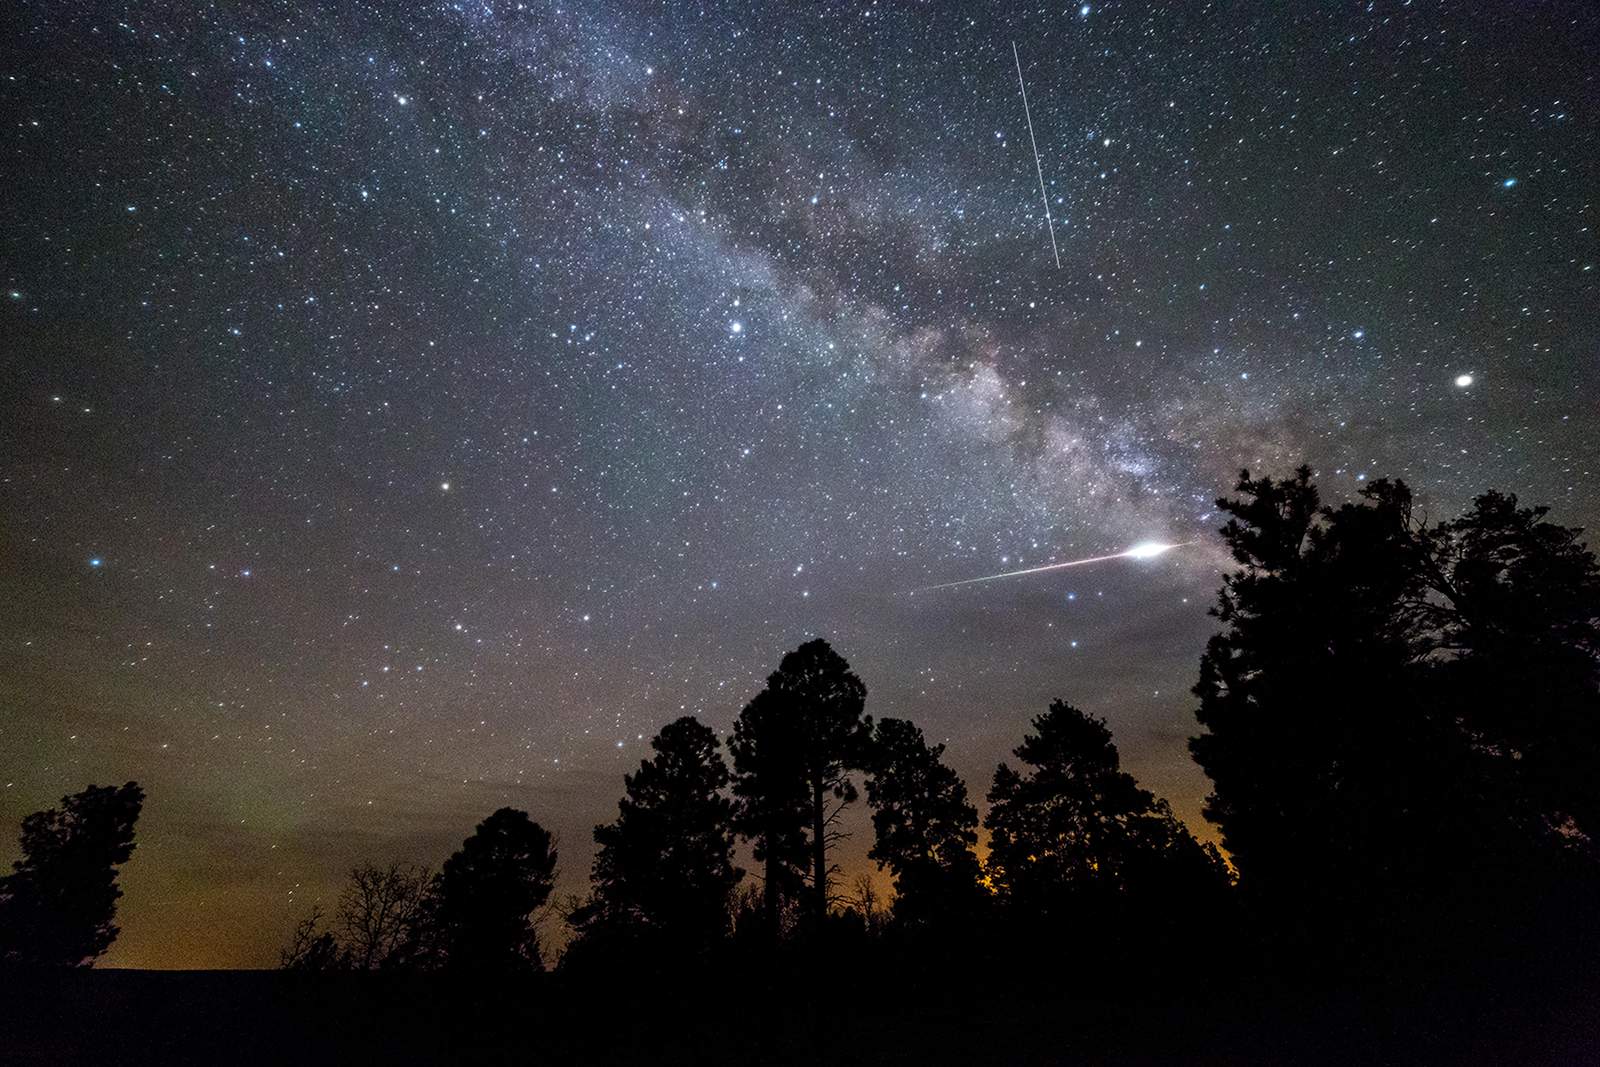 Look up: Halley’s Comet meteor shower and last supermoon of 2020 to dazzle sky this week